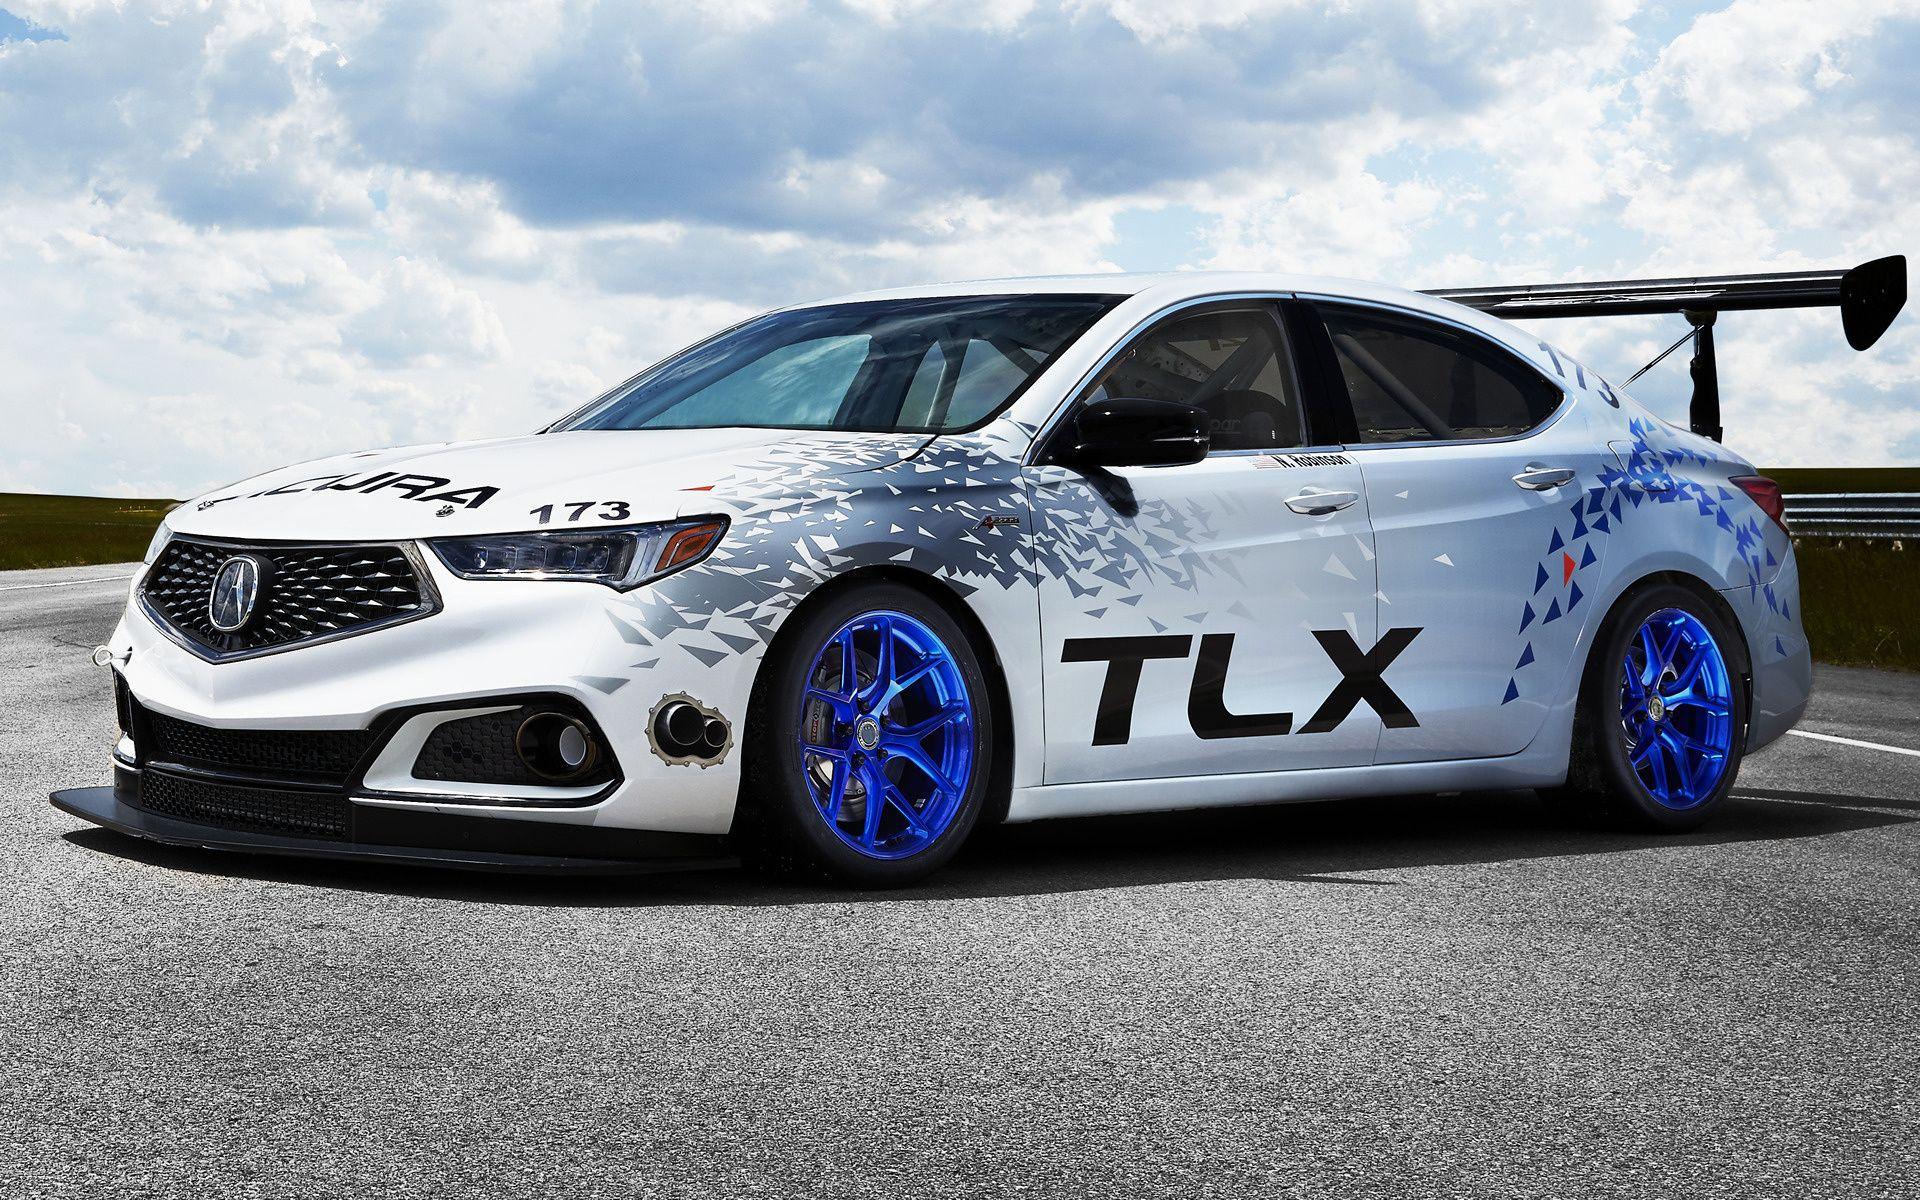 Acura TLX A Spec Race Car (2017) Wallpaper And HD Image